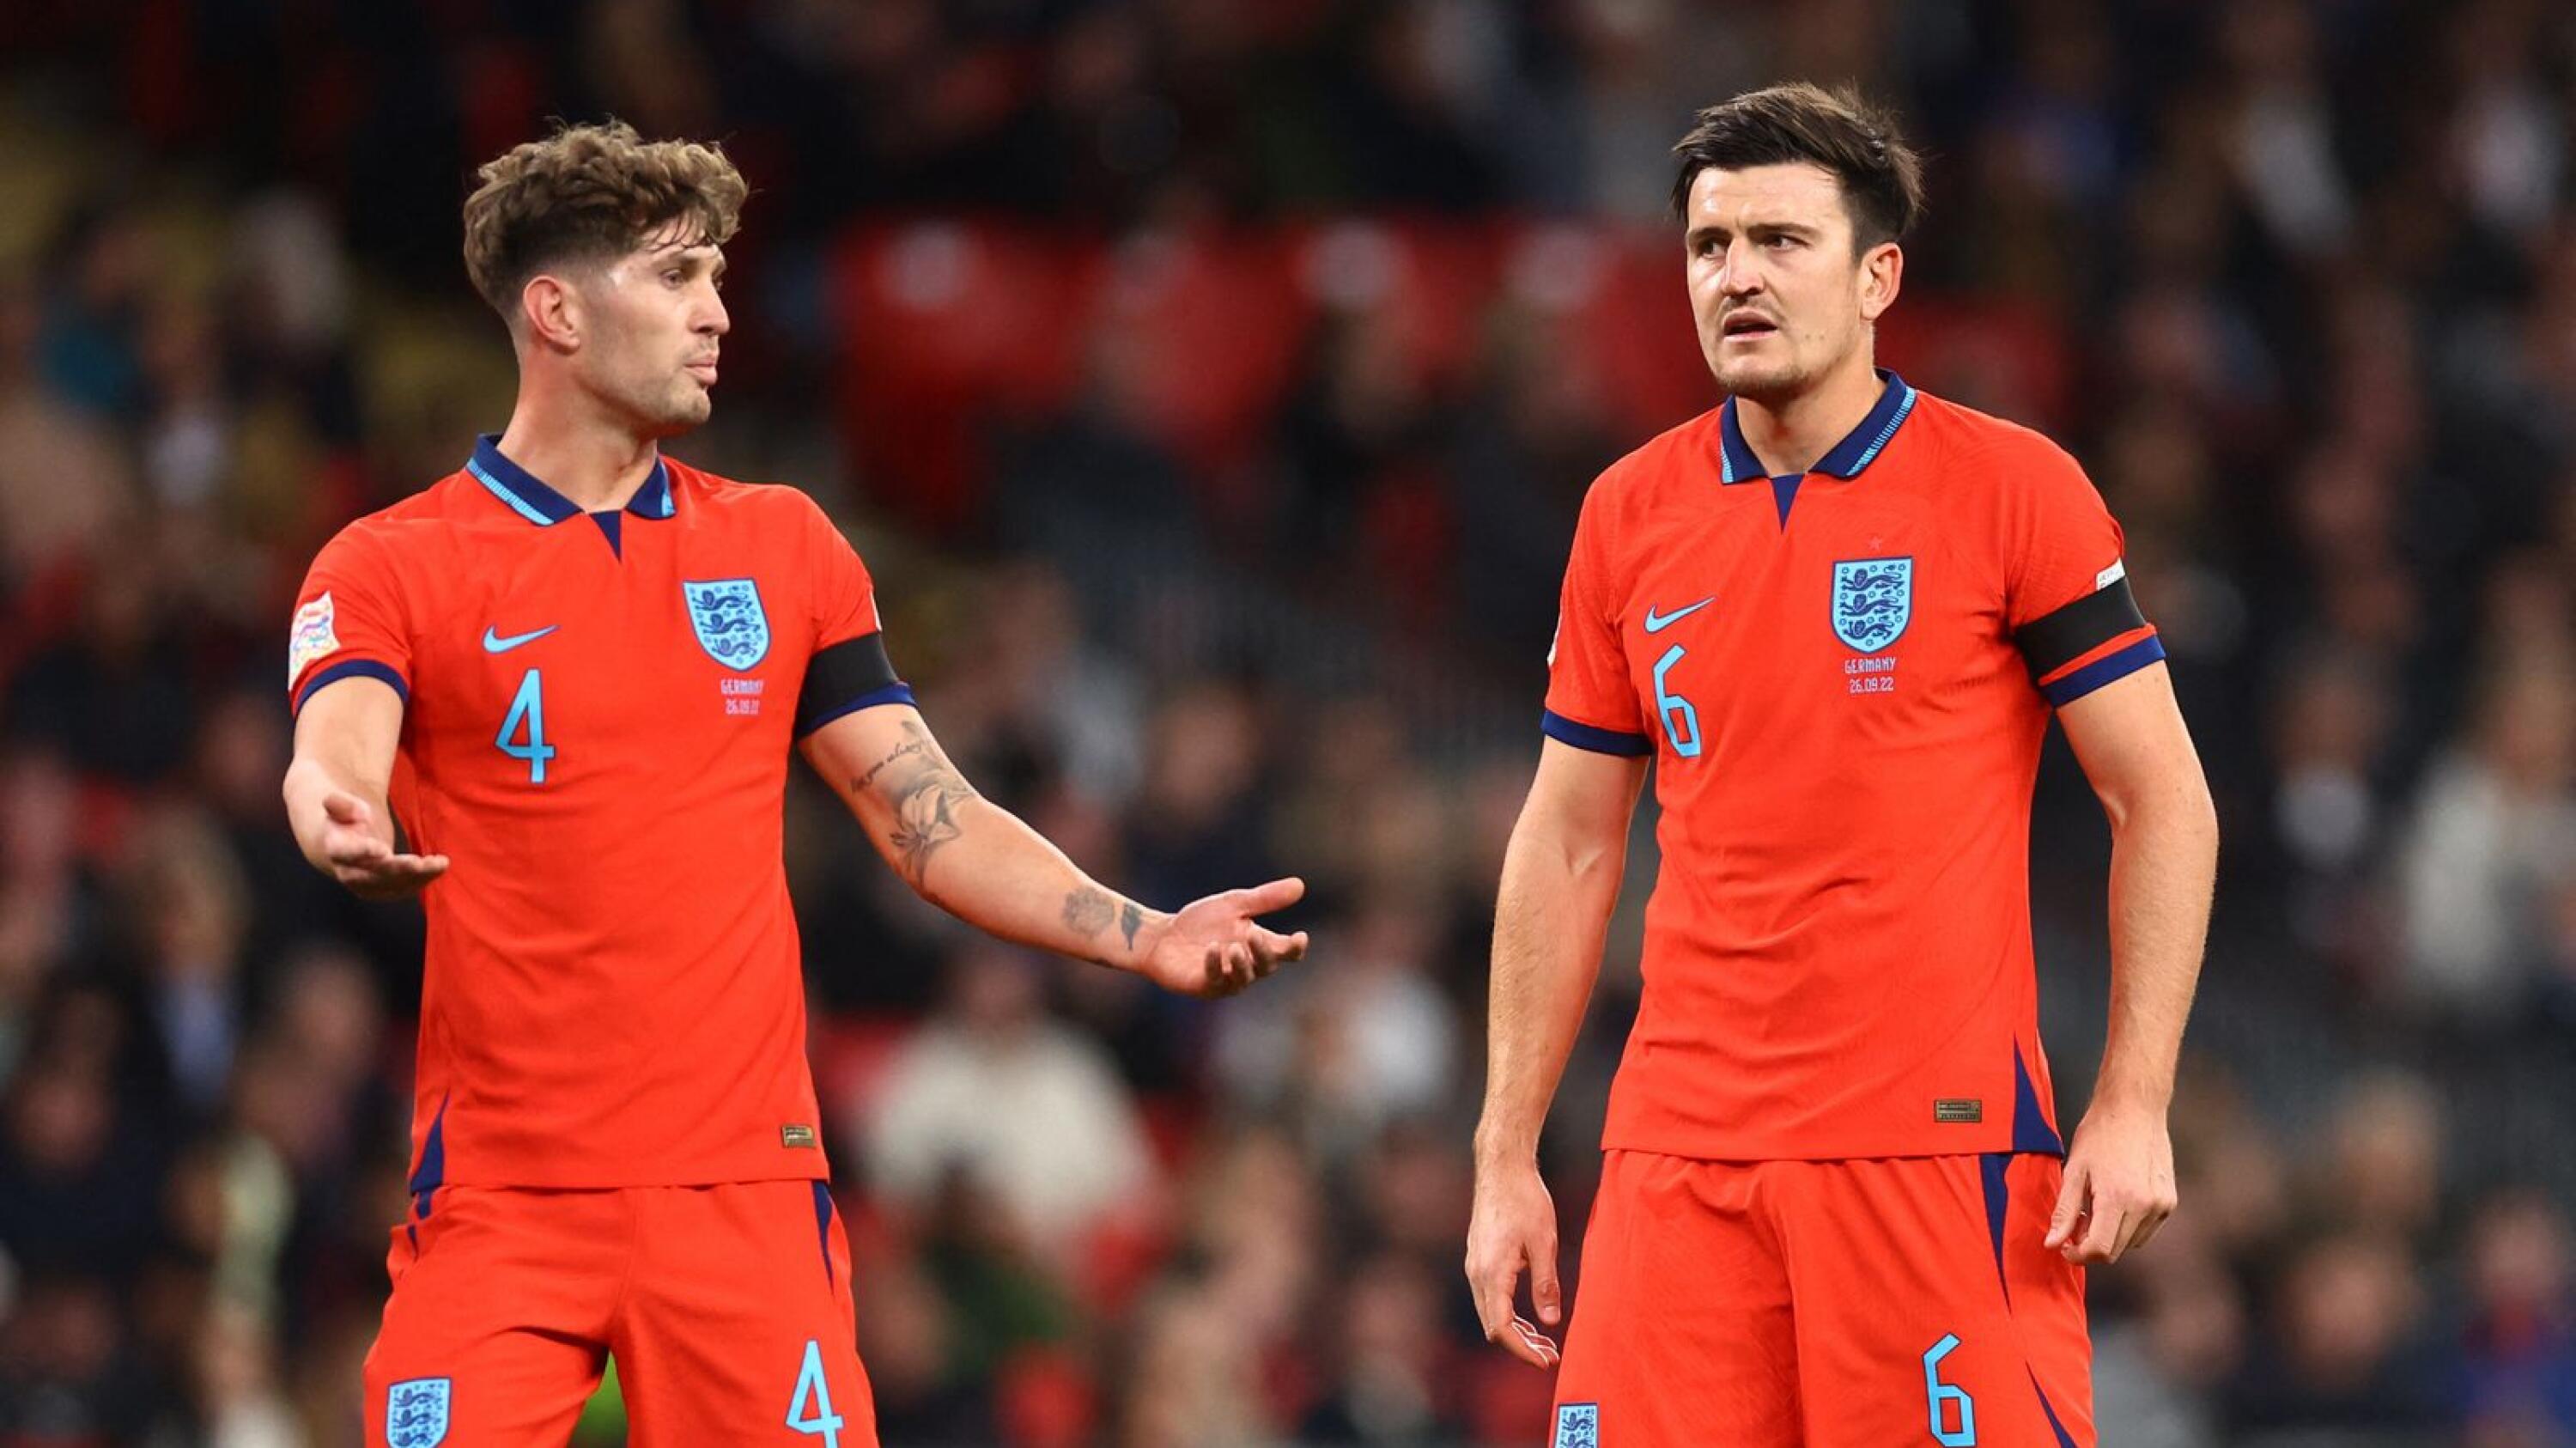 John Stones and Harry Maguire react during England’s friendly against Germany at Wembley on Monday.